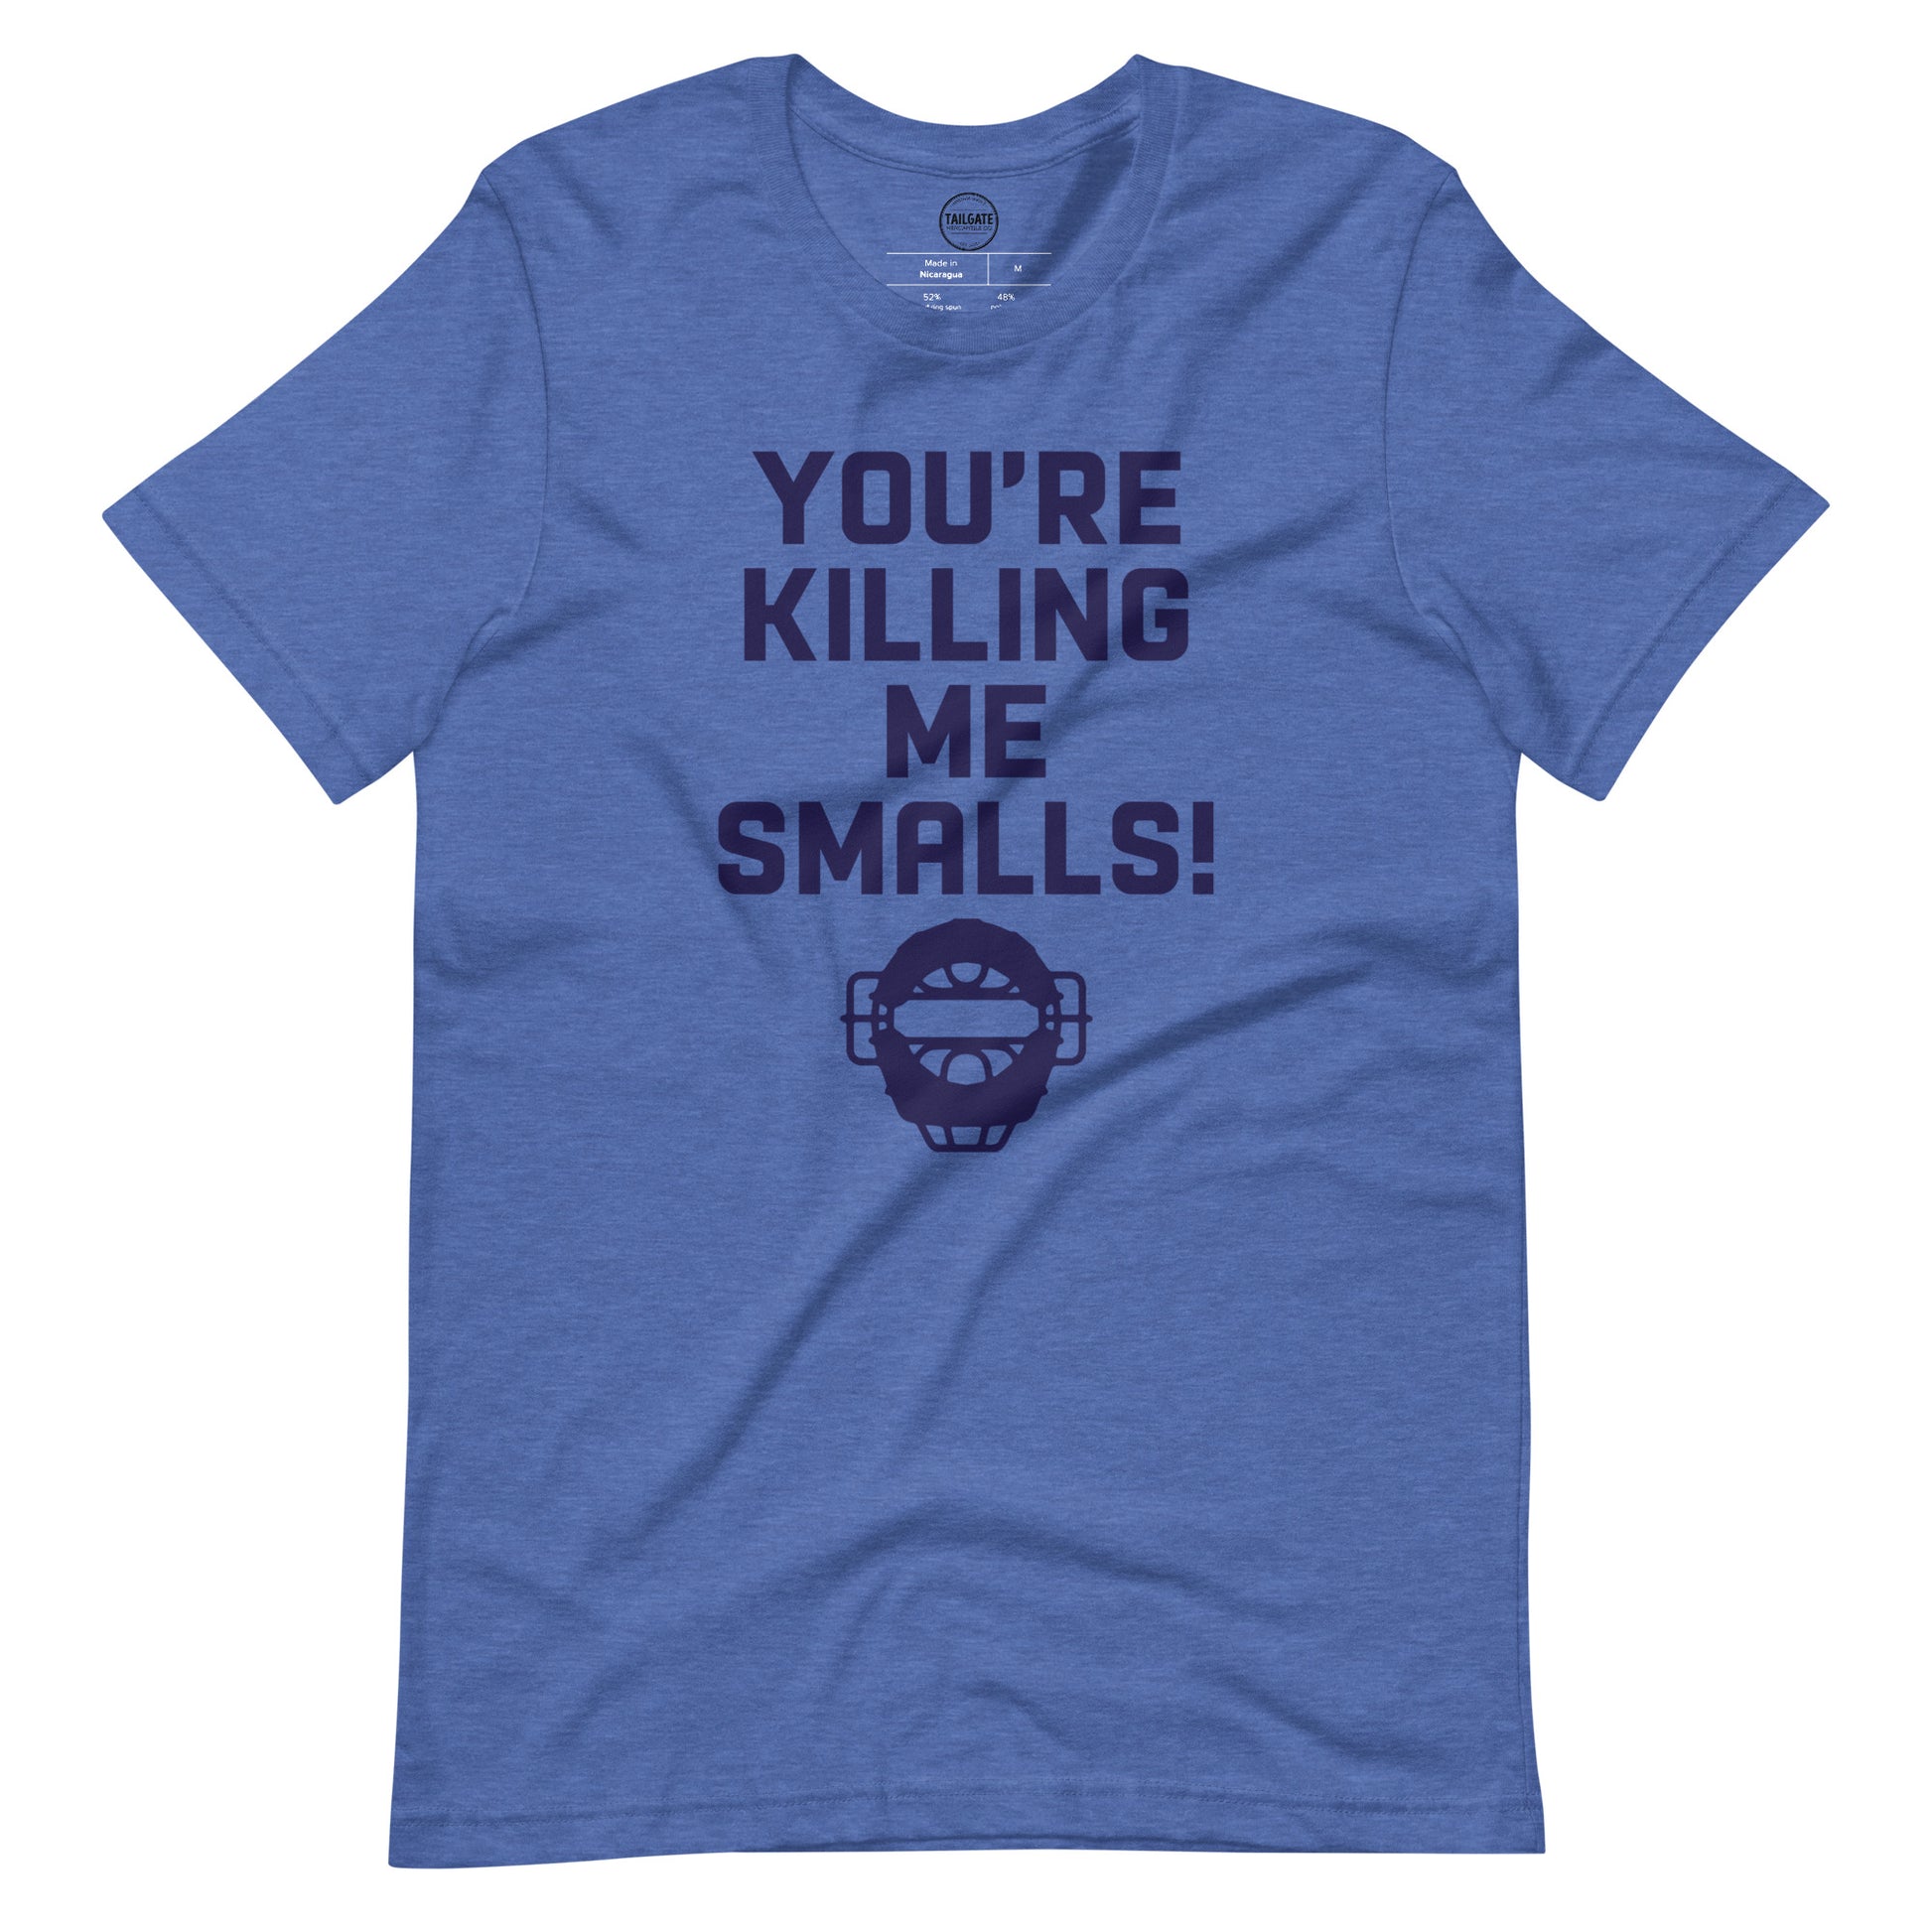 Image of heather royal blue t-shirt with design of "You're Killing Me Smalls!" in navy located on centre chest. FOR.EV.ER. is an homage to the great baseball movie "The Sandlot". This design is exclusive to Tailgate Mercantile and available only online.